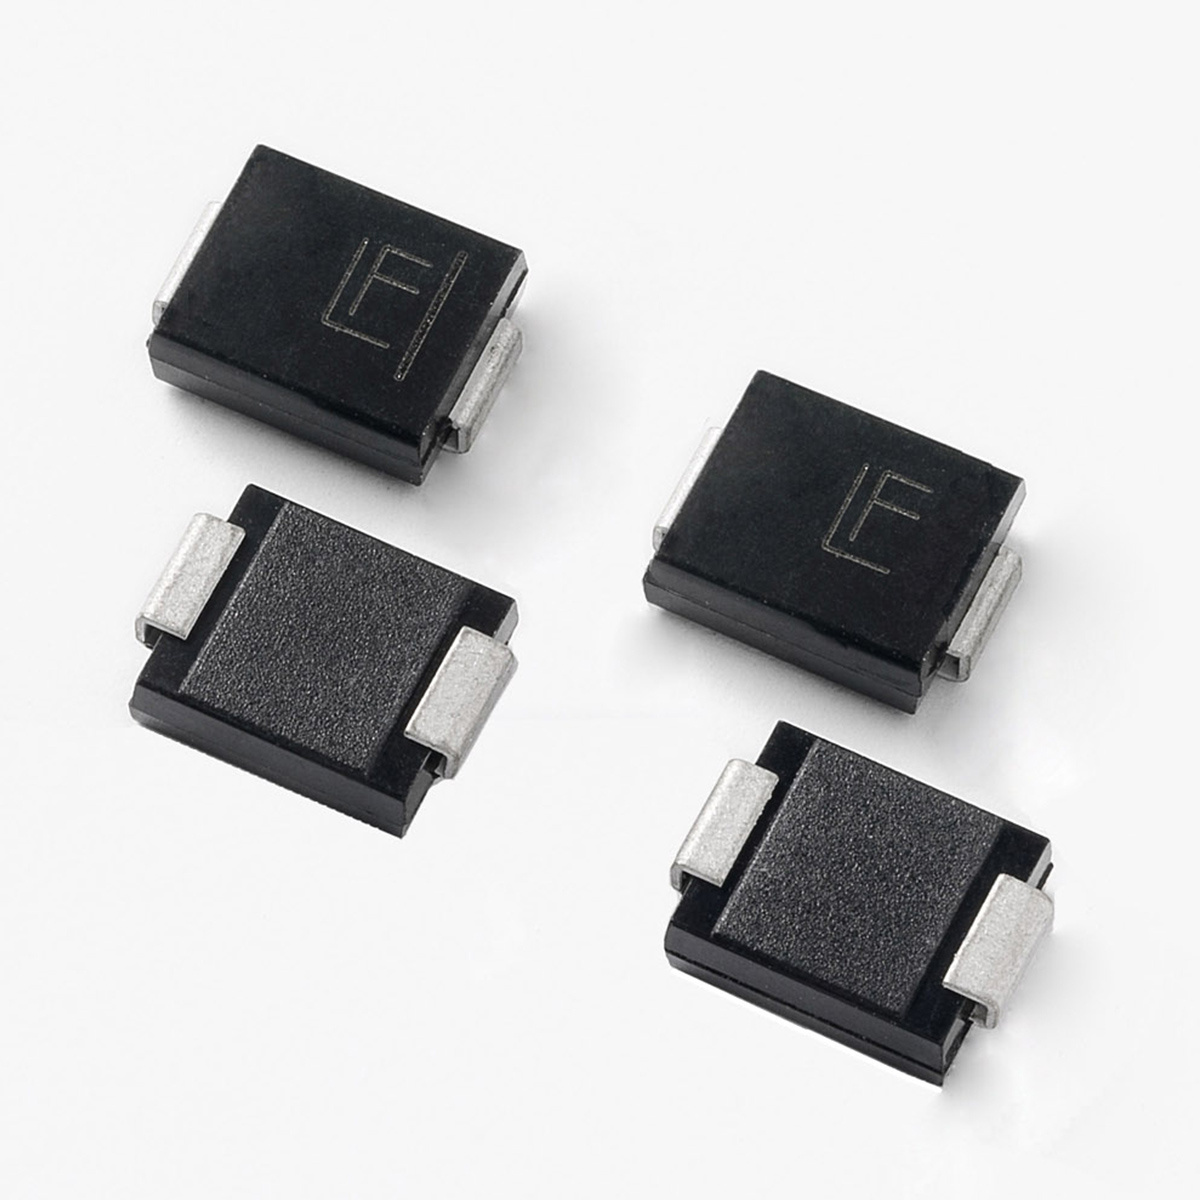 Compact SMD TVS Diodes Provide High-Reliability, 66% Increase in Surge Handling